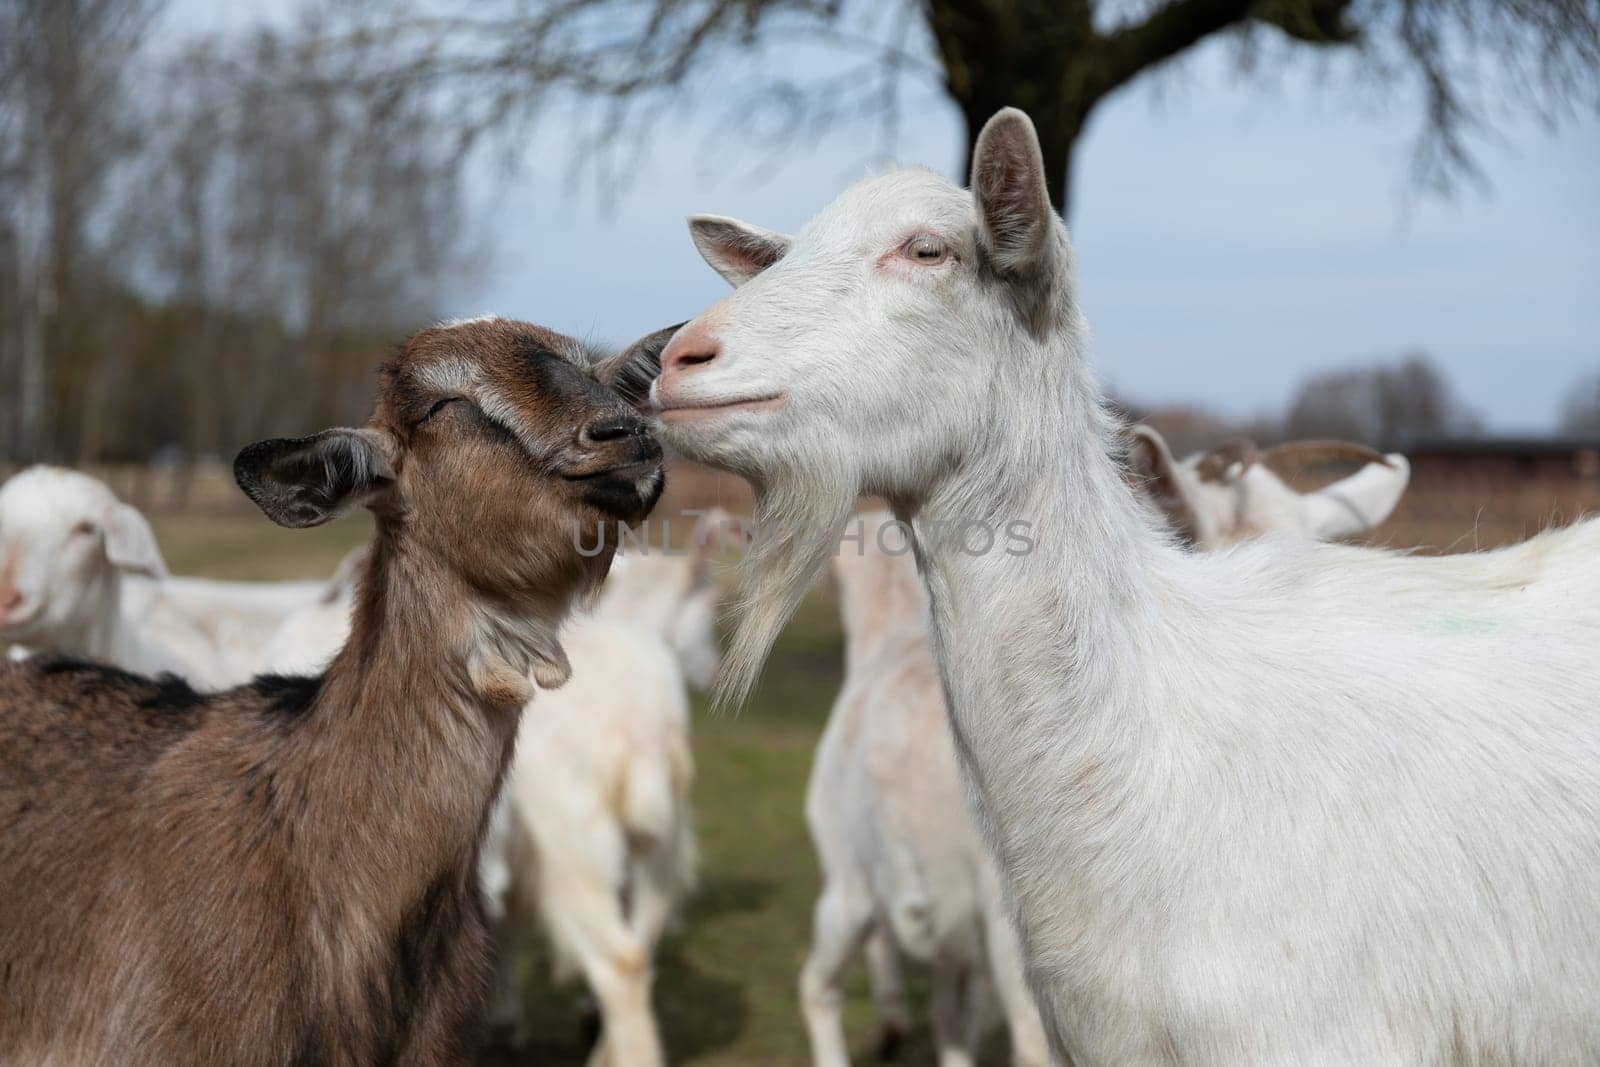 A couple of goats are seen standing in a grassy field. The goats appear alert and are calmly looking around their surroundings. The grass is green and lush, providing a serene backdrop for the goats.